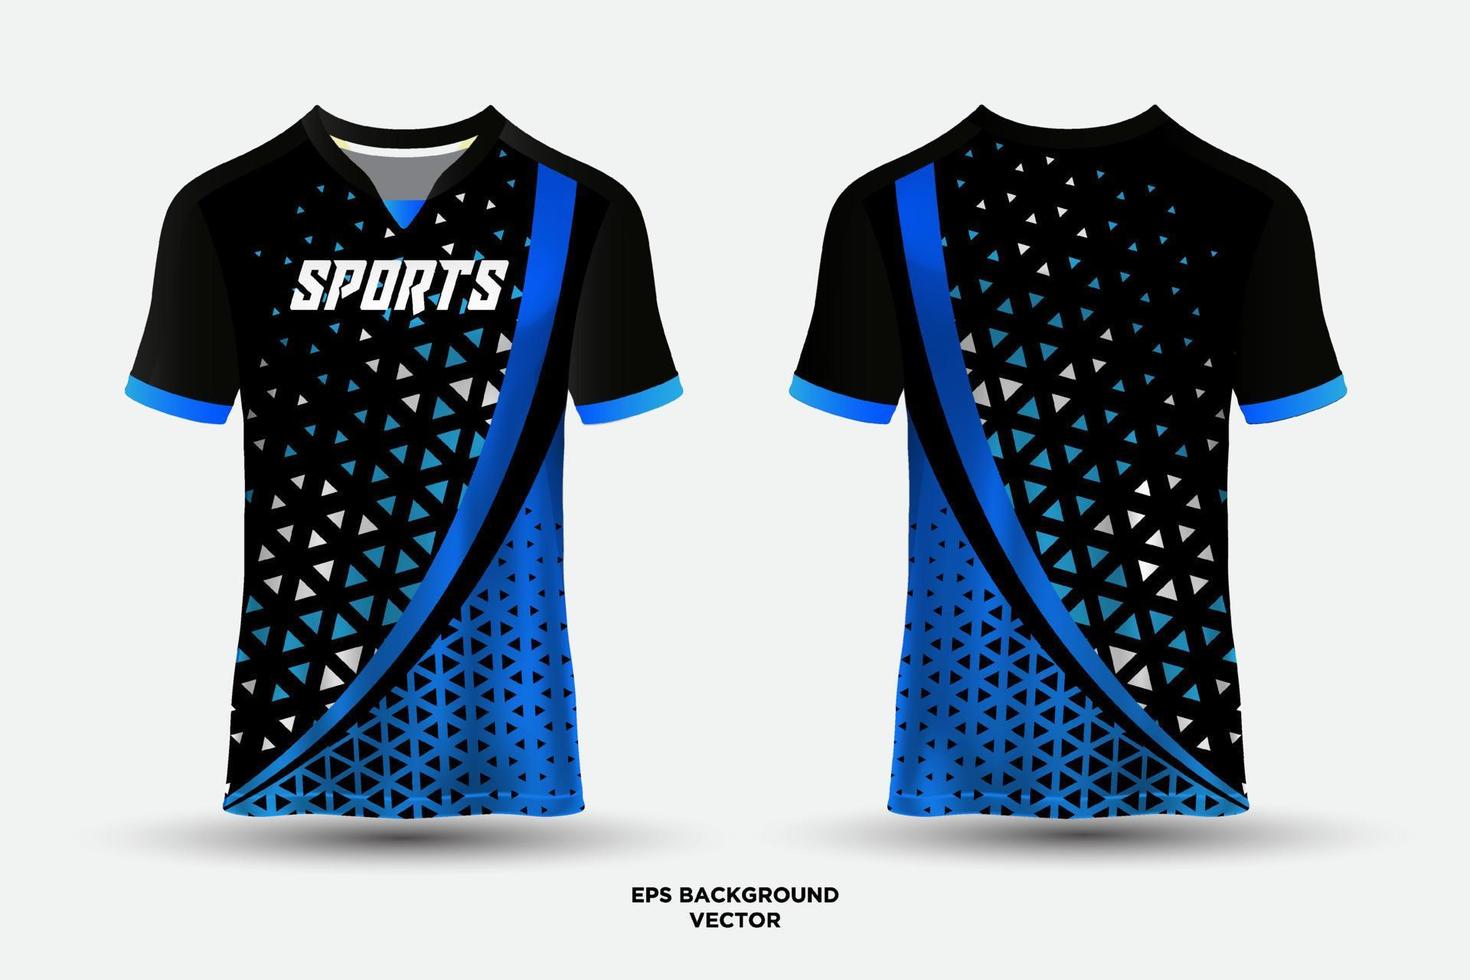 Futuristic design jersey T shirt sports suitable for racing, soccer, e sports. vector